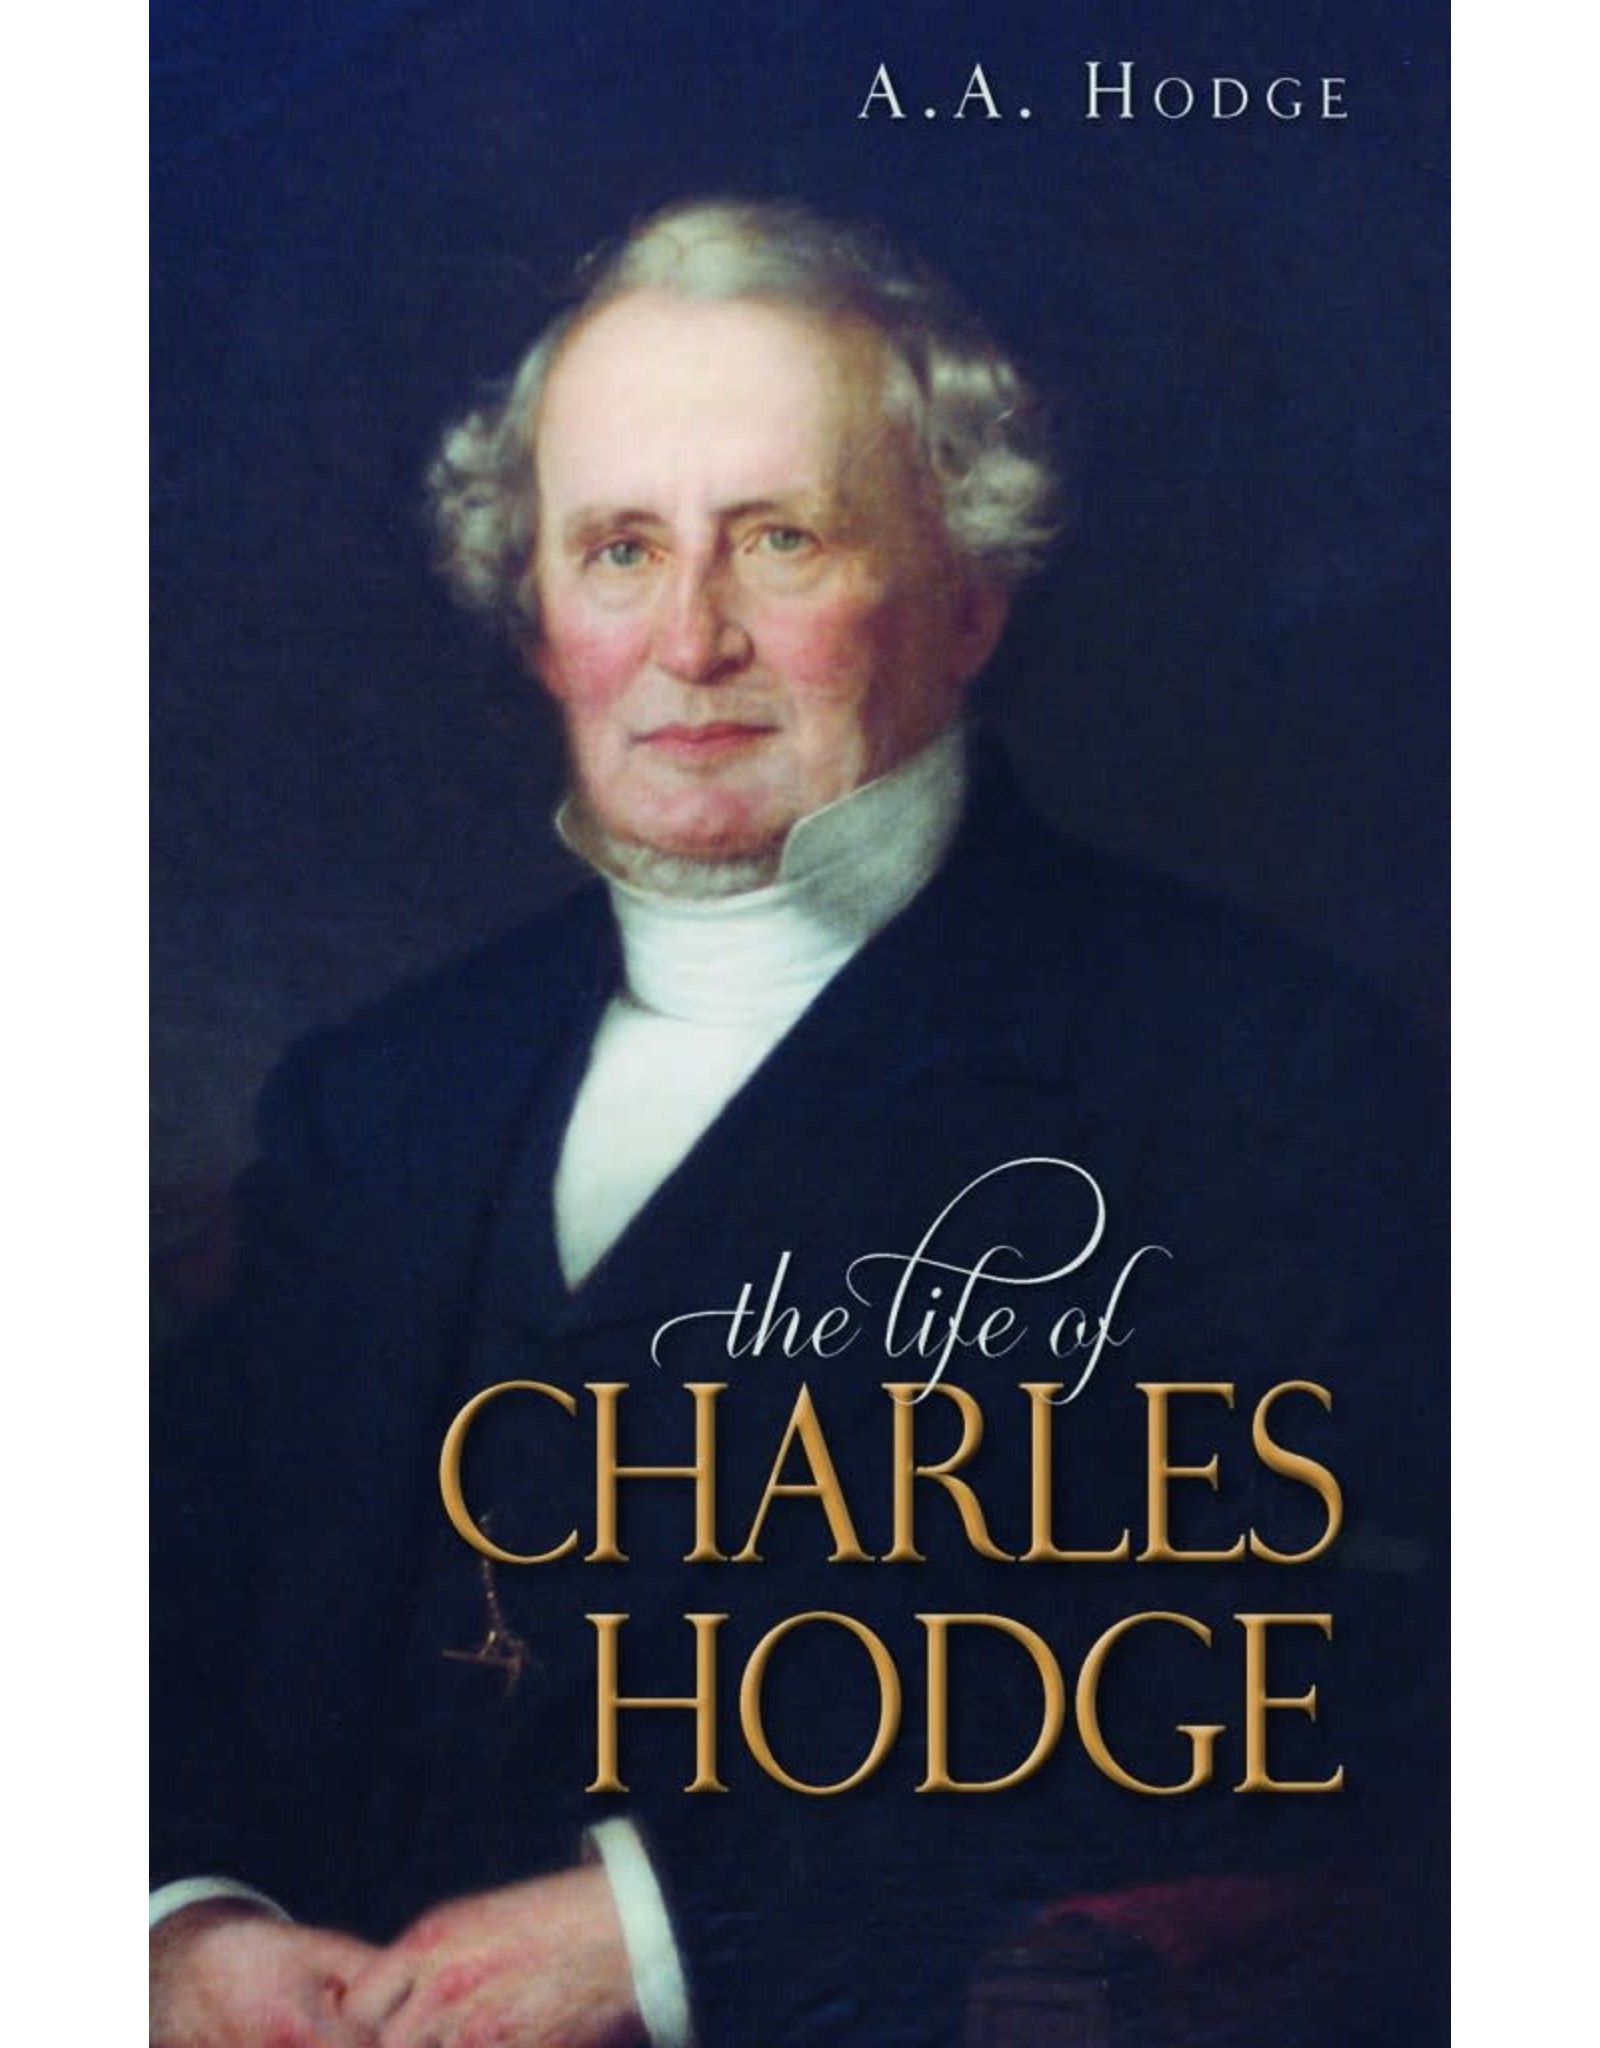 Hodge The Life of Charles Hodge